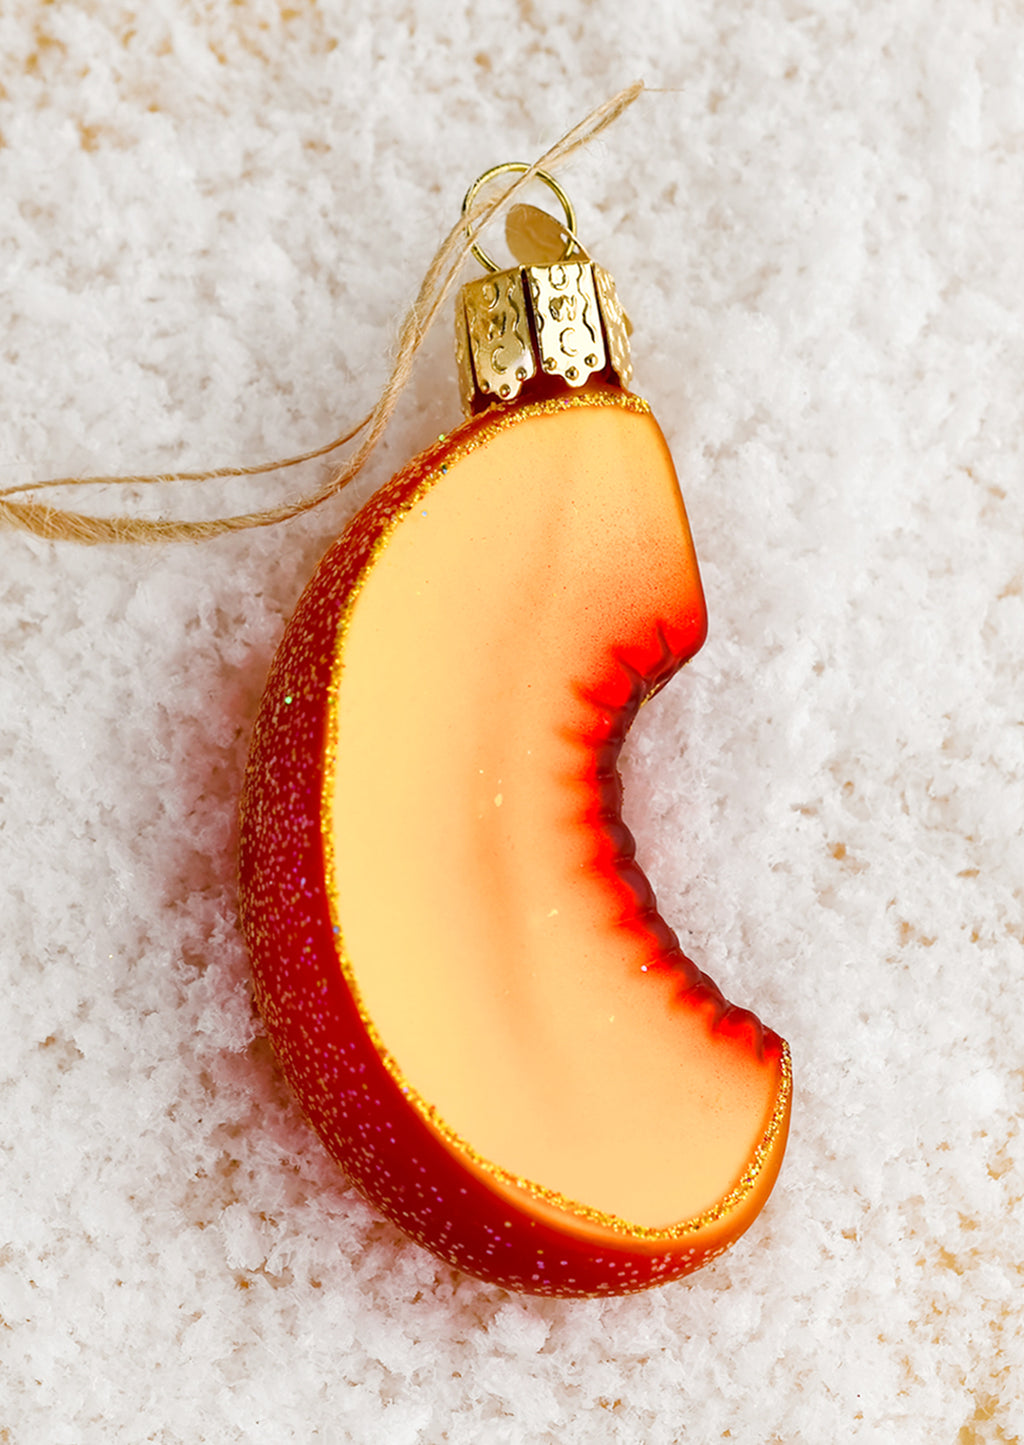 1: A glass ornament in the shape of a sliced peach.